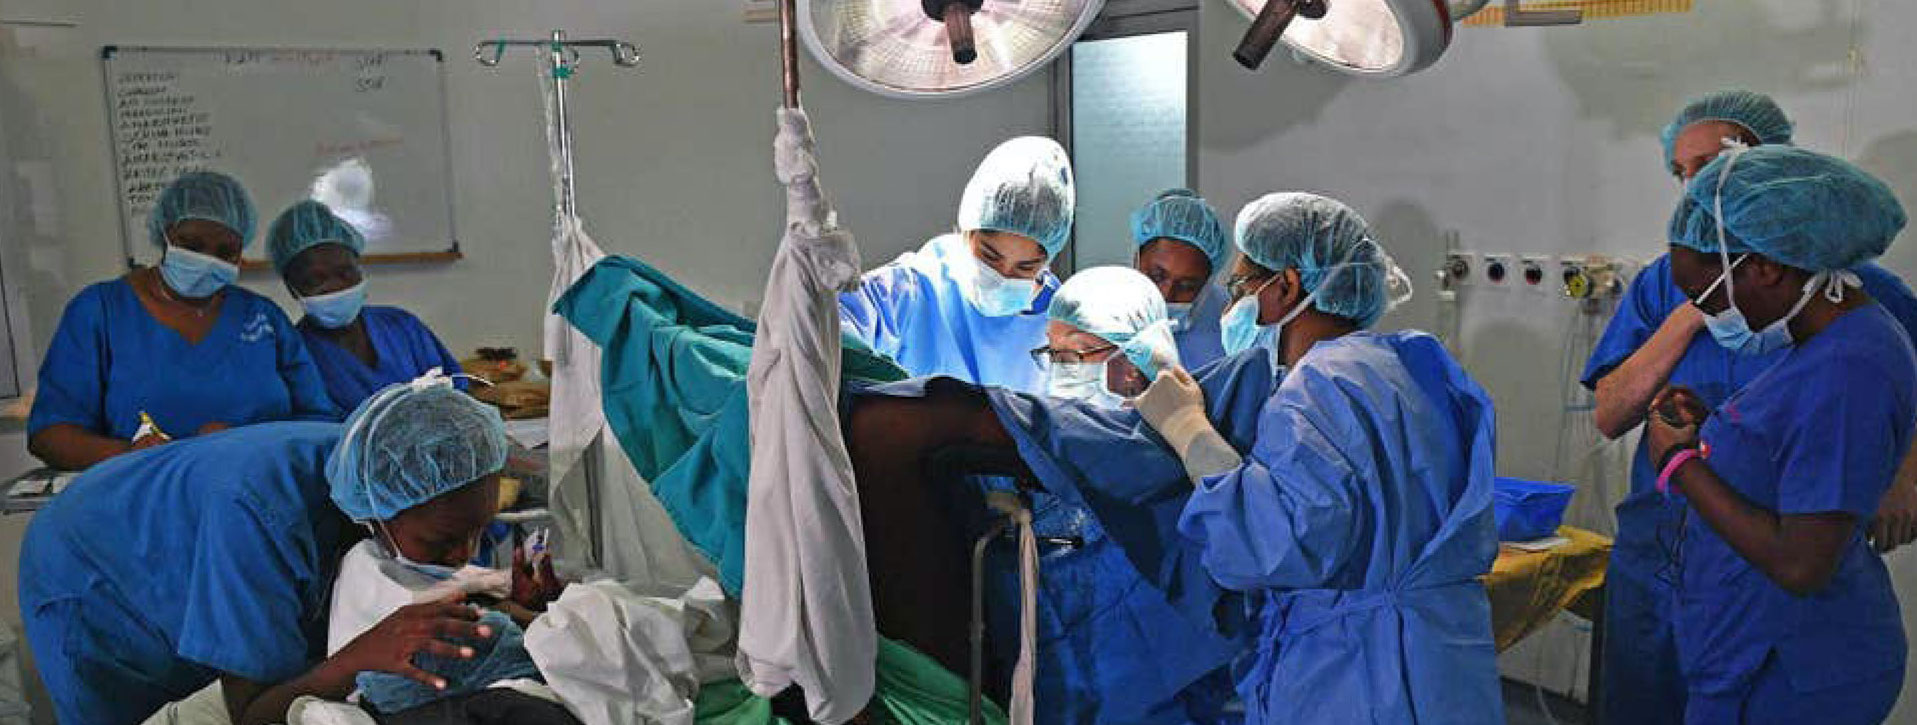 Surgeries available in Africa, the U.S and Europe